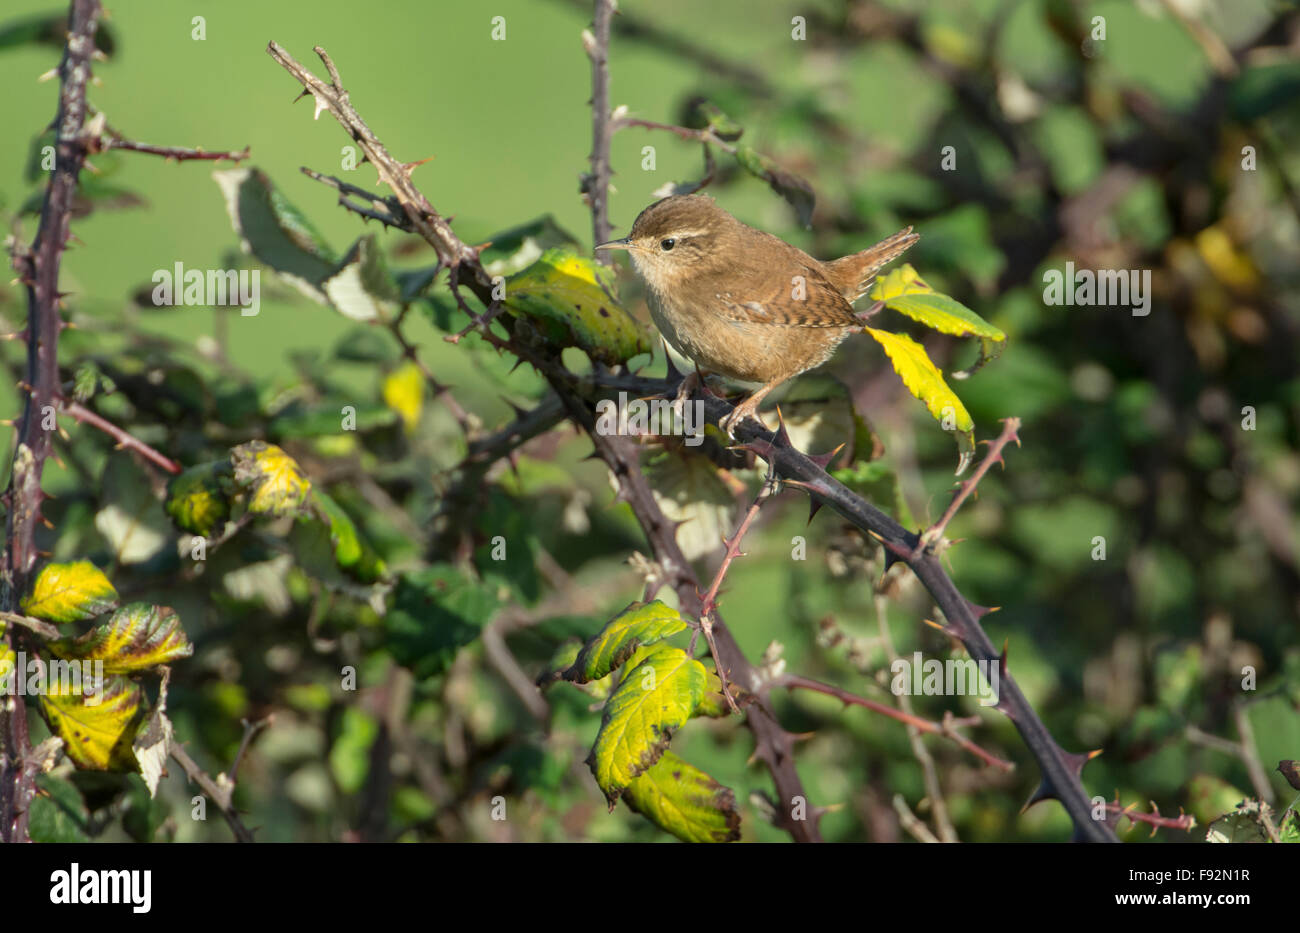 Wren (Troglodytes troglodytes) perched in a bramble bush. The species is known as the winter wren in North America. Stock Photo